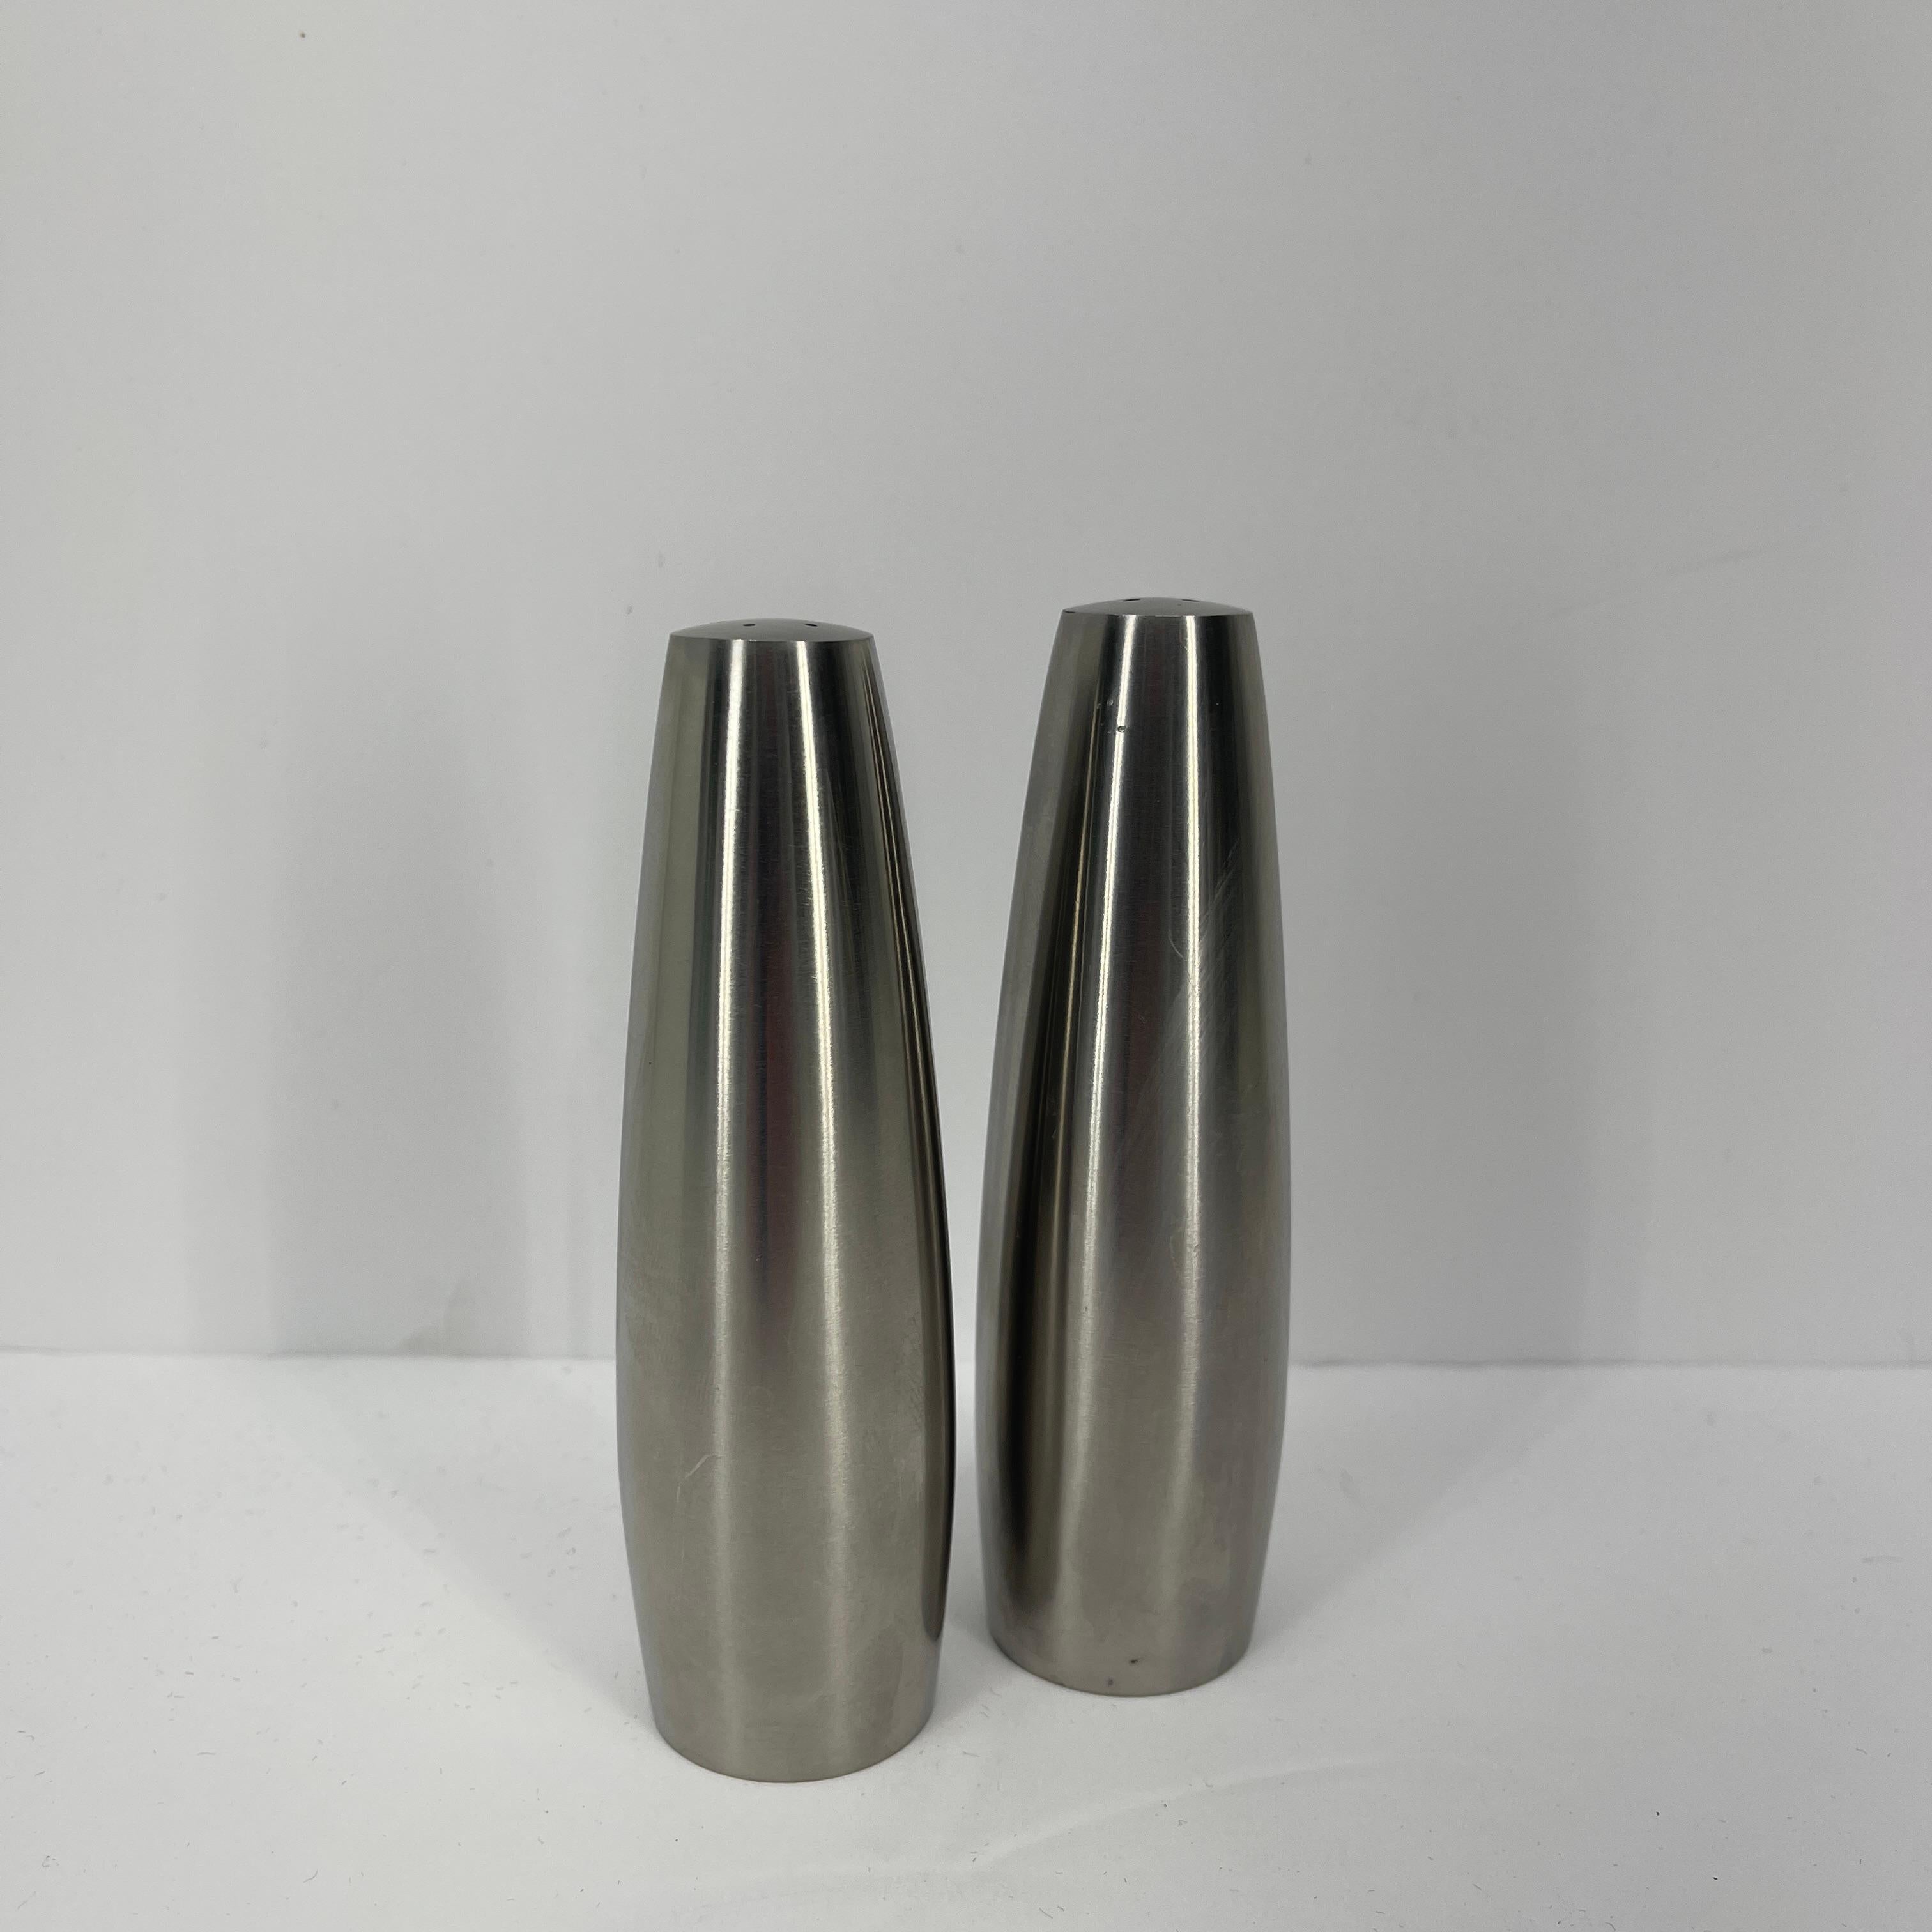 Mid-Century Modern Danish pair of salt and pepper shakers by Jens Harald Quistgaard for Dansk, circa 1970's. The Minimalist shakers feature a tapered cylindrical form in brushed stainless steel. The set is a classic Danish design; they look like